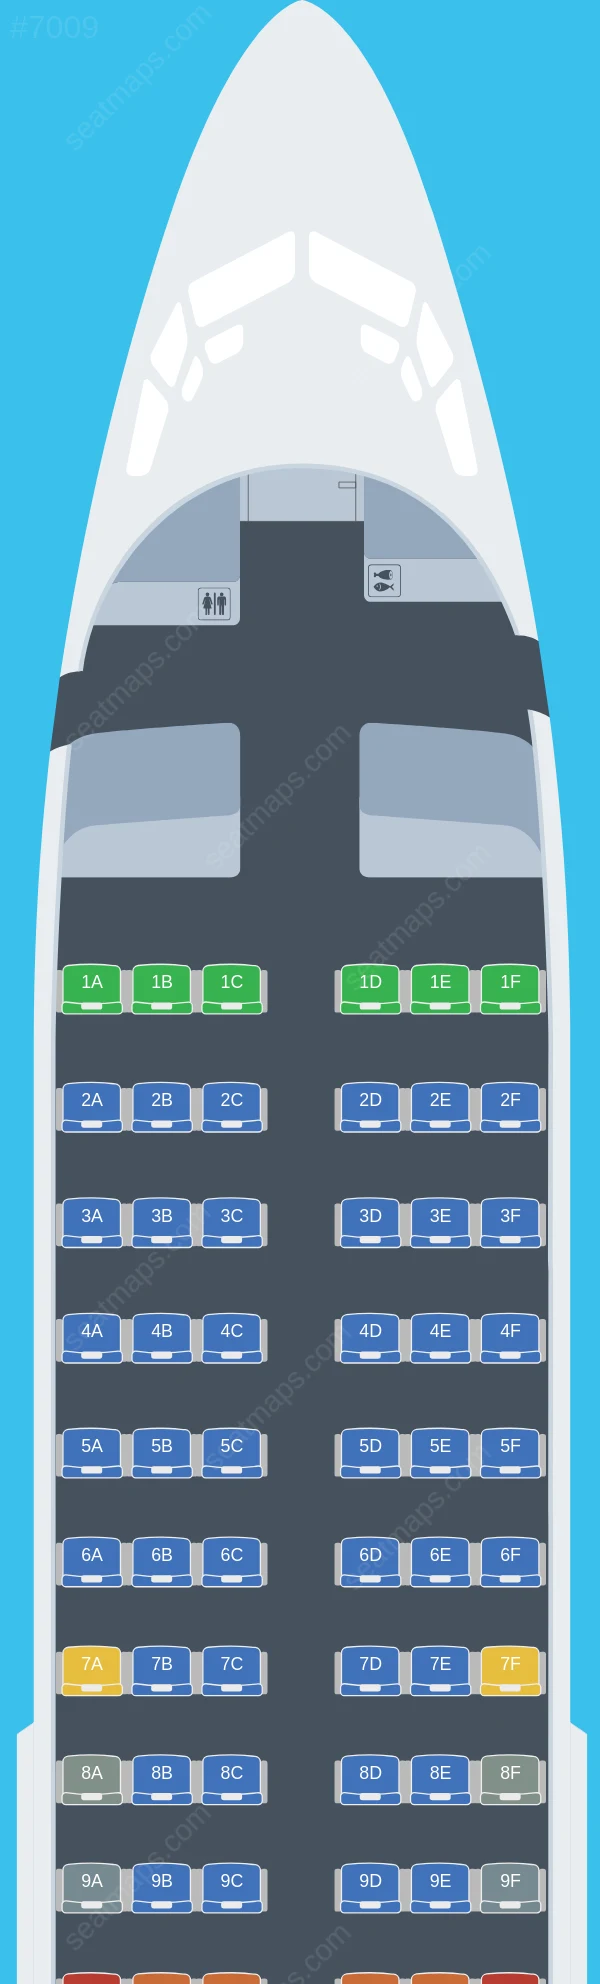 Lucky Air Boeing 737-700 V.1 seatmap preview